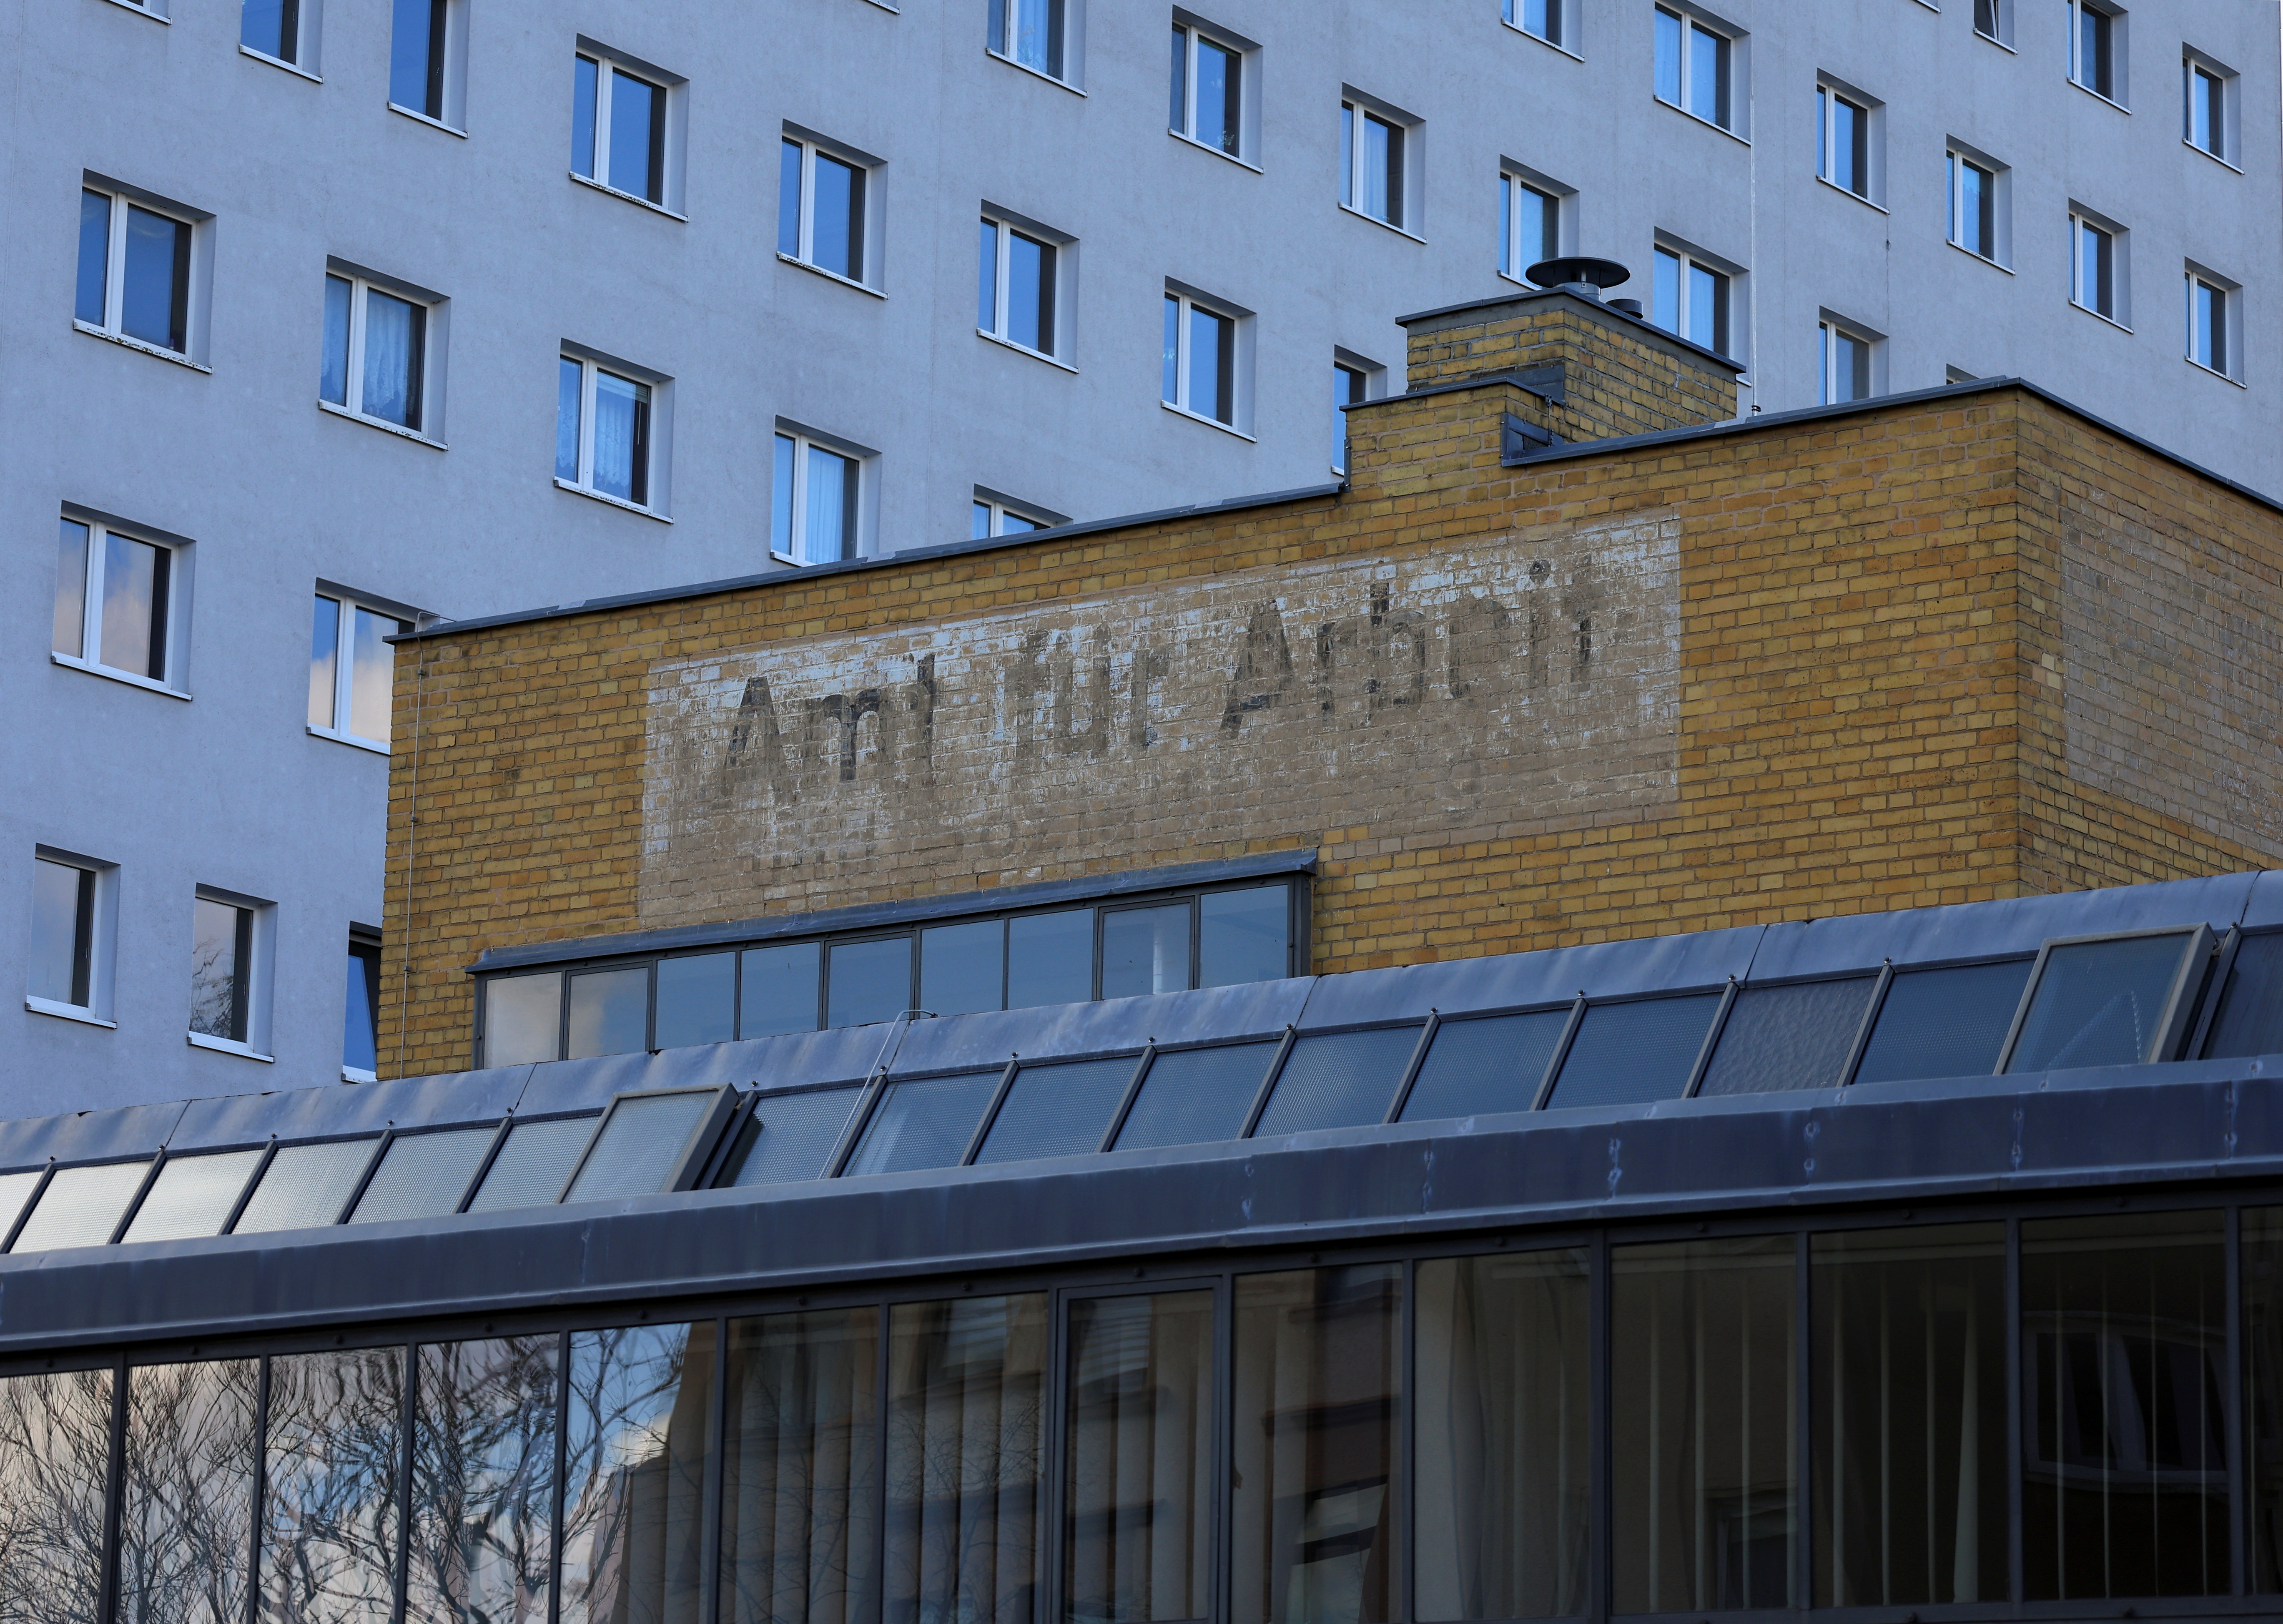 The Employment Office "Amt fuer Arbeit" is pictured in Dessau